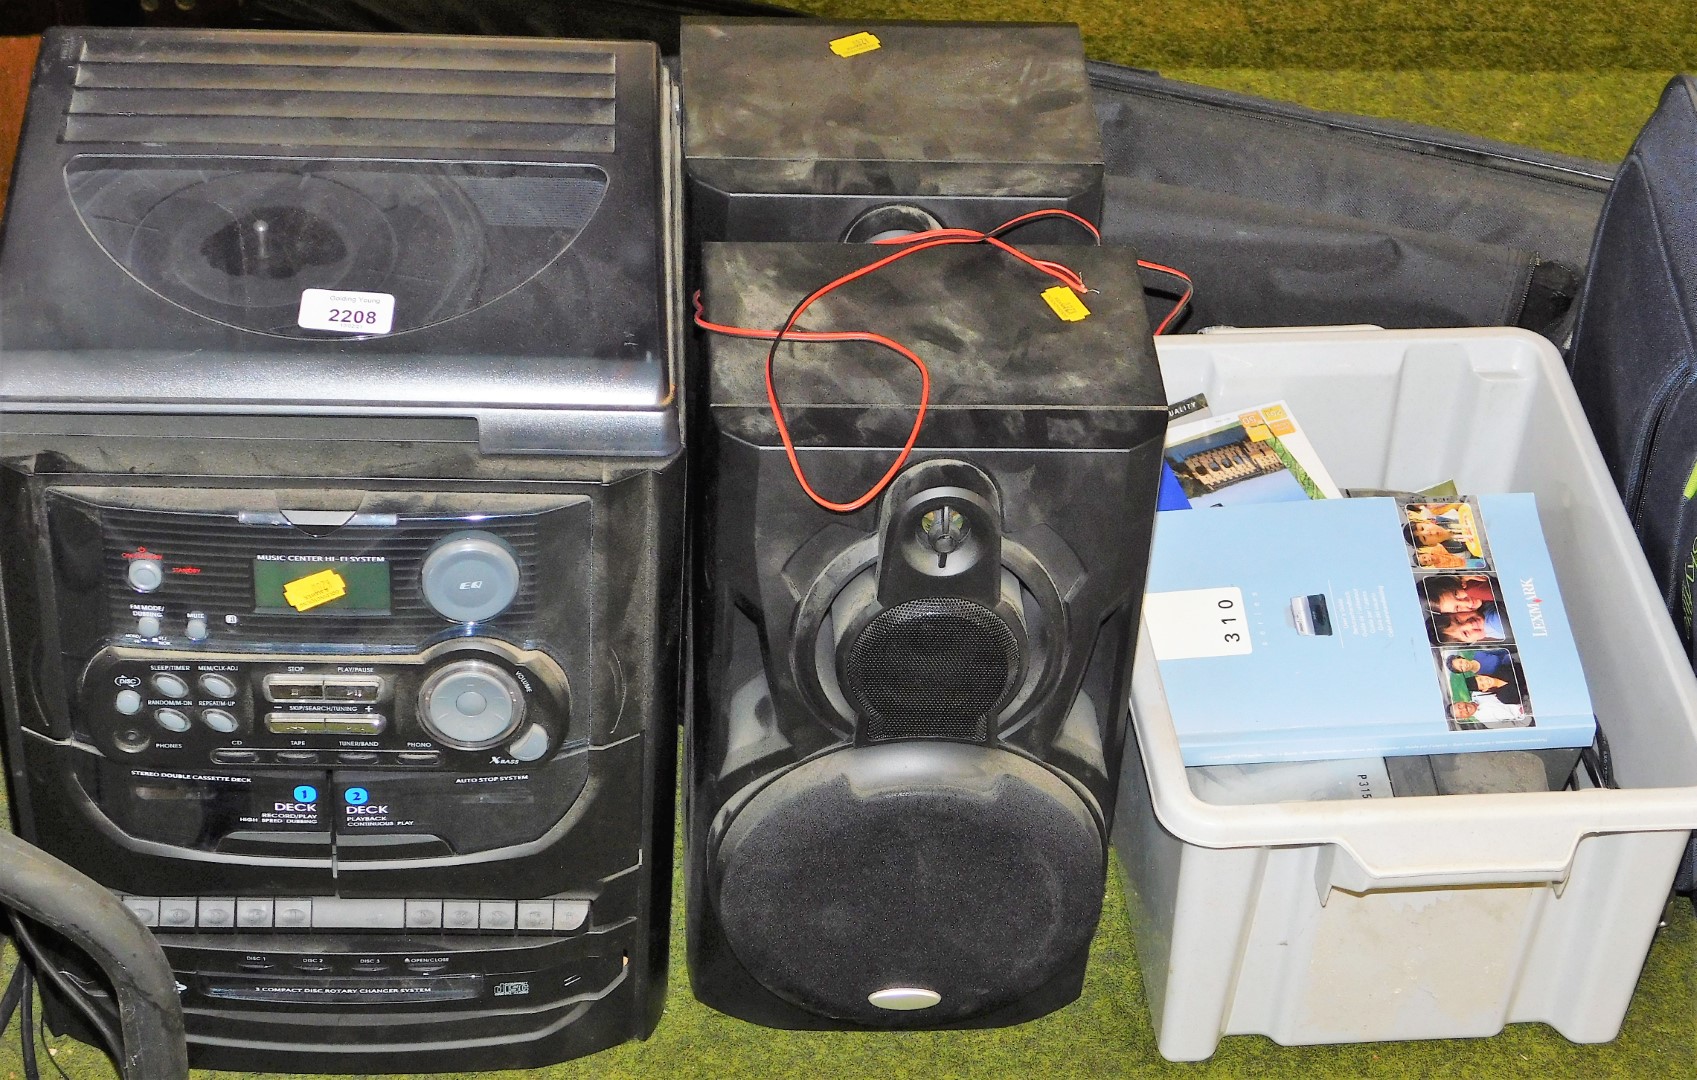 A Music Centre hi-fi system, and a Kodak colour printer with ink and various gloss photograph paper.